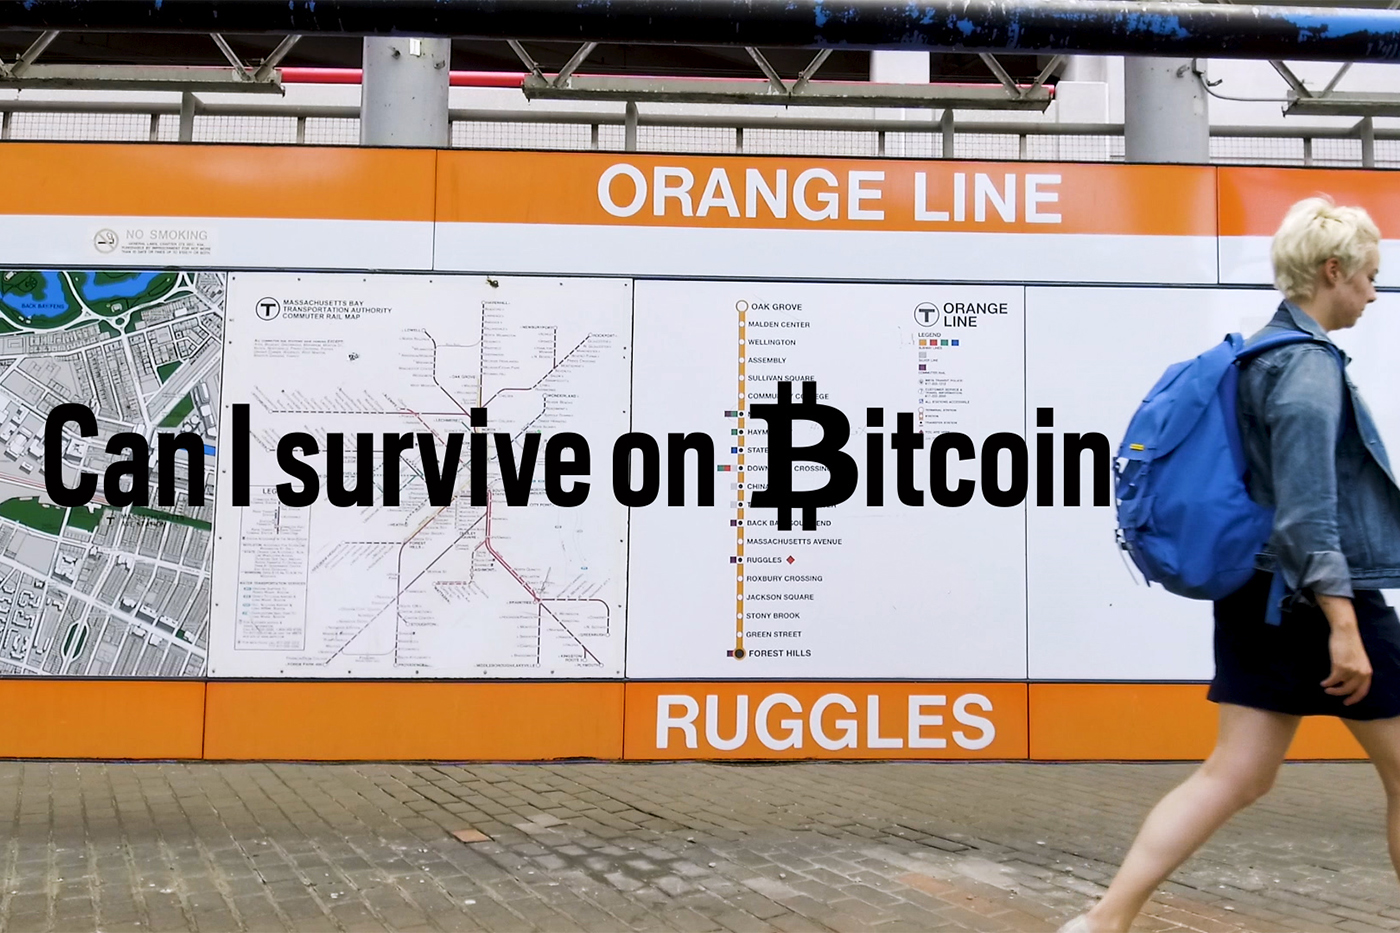 Here's what happened when we tried to live on Bitcoin for a day.